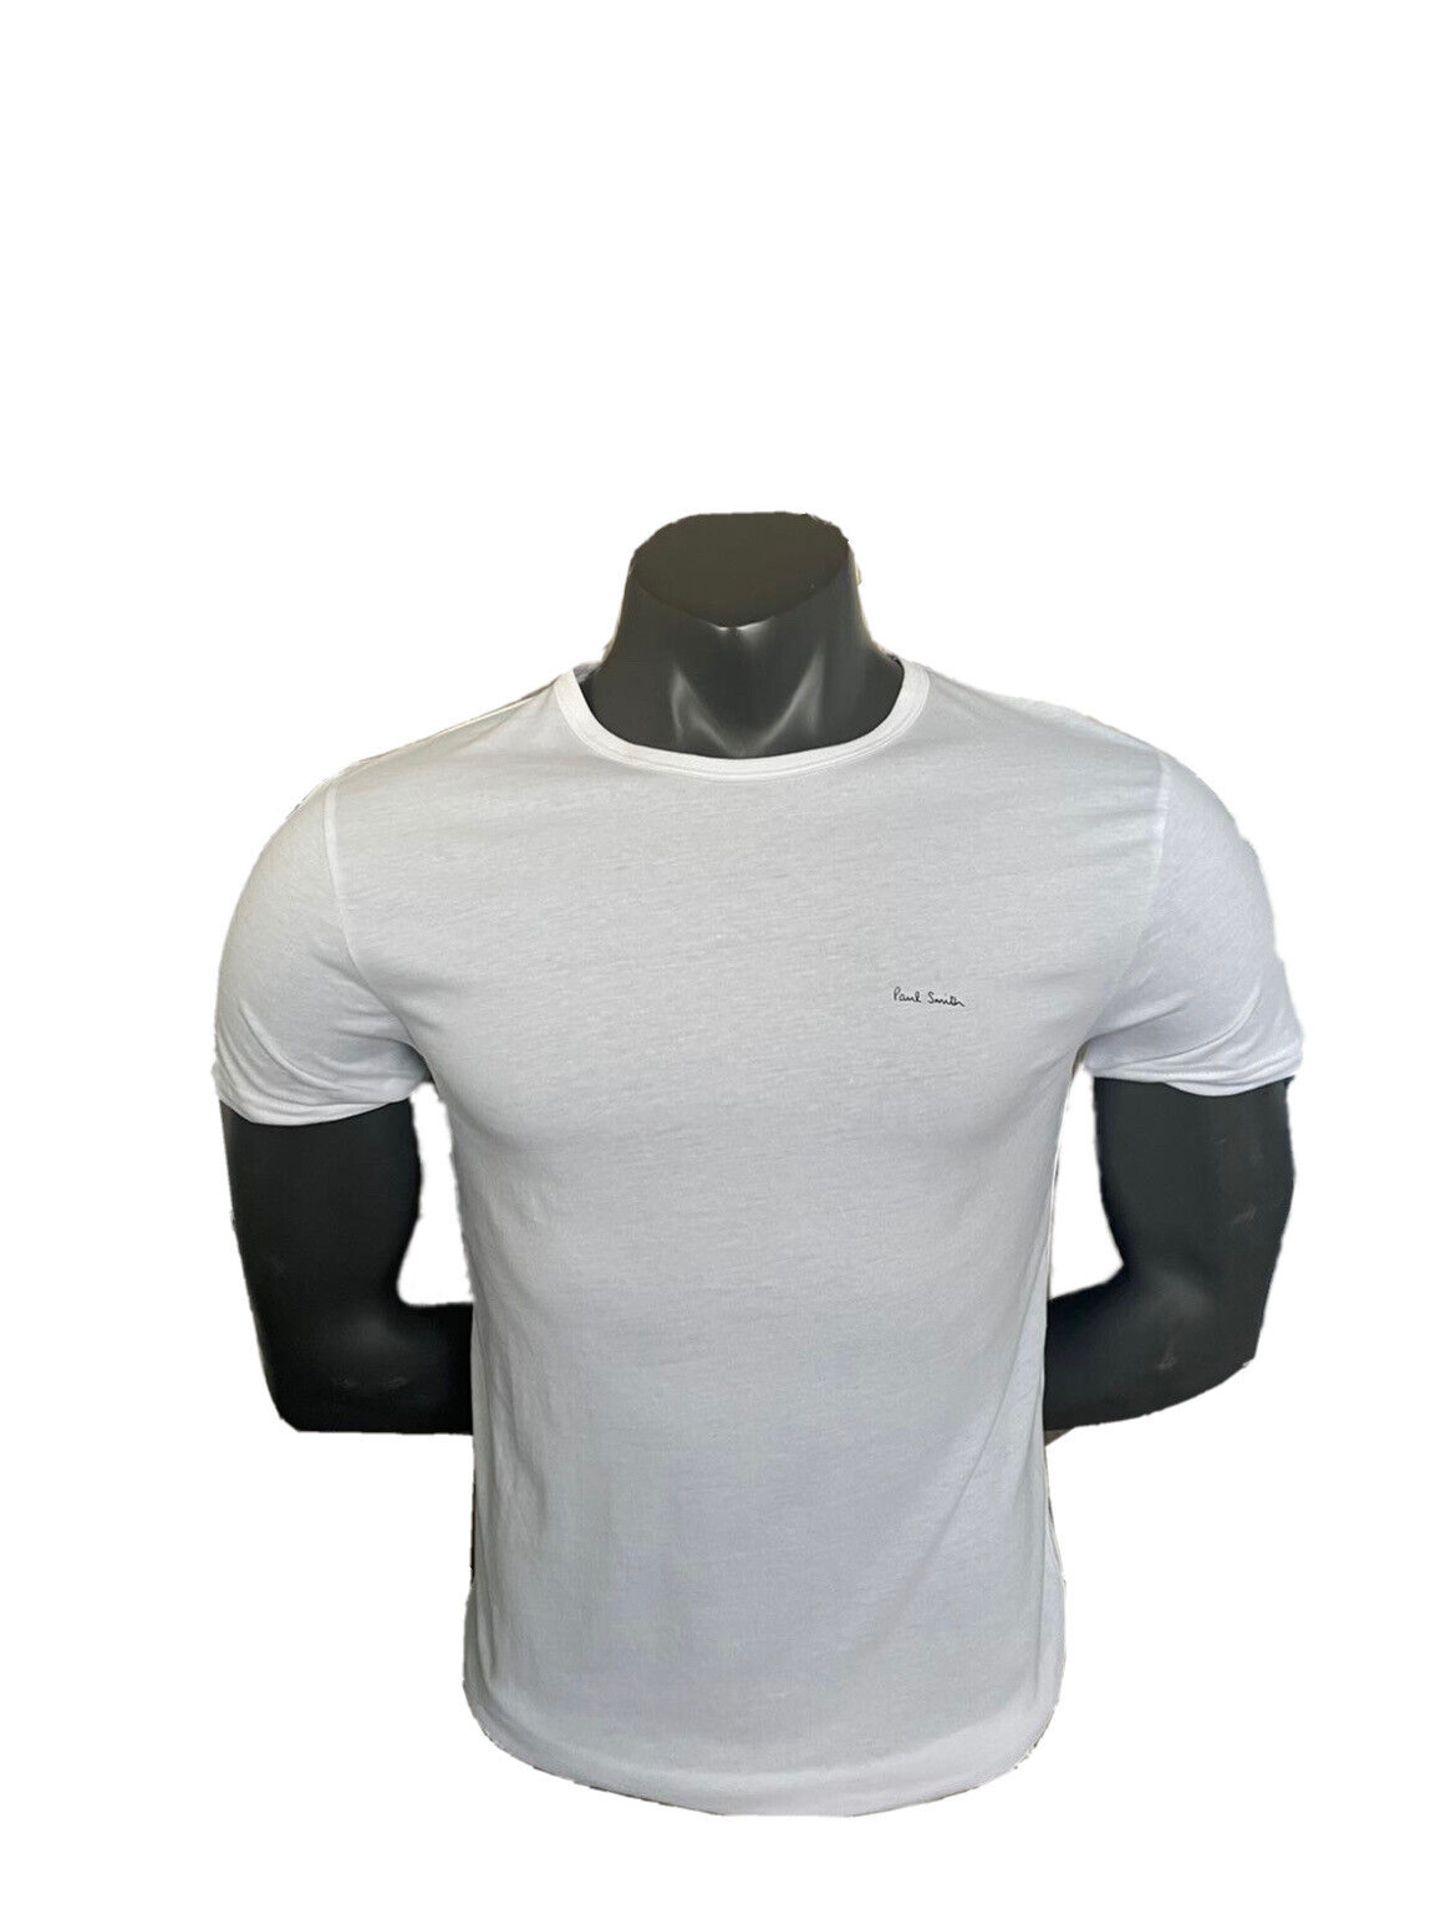 paul smith white tshirt size s RRP £49